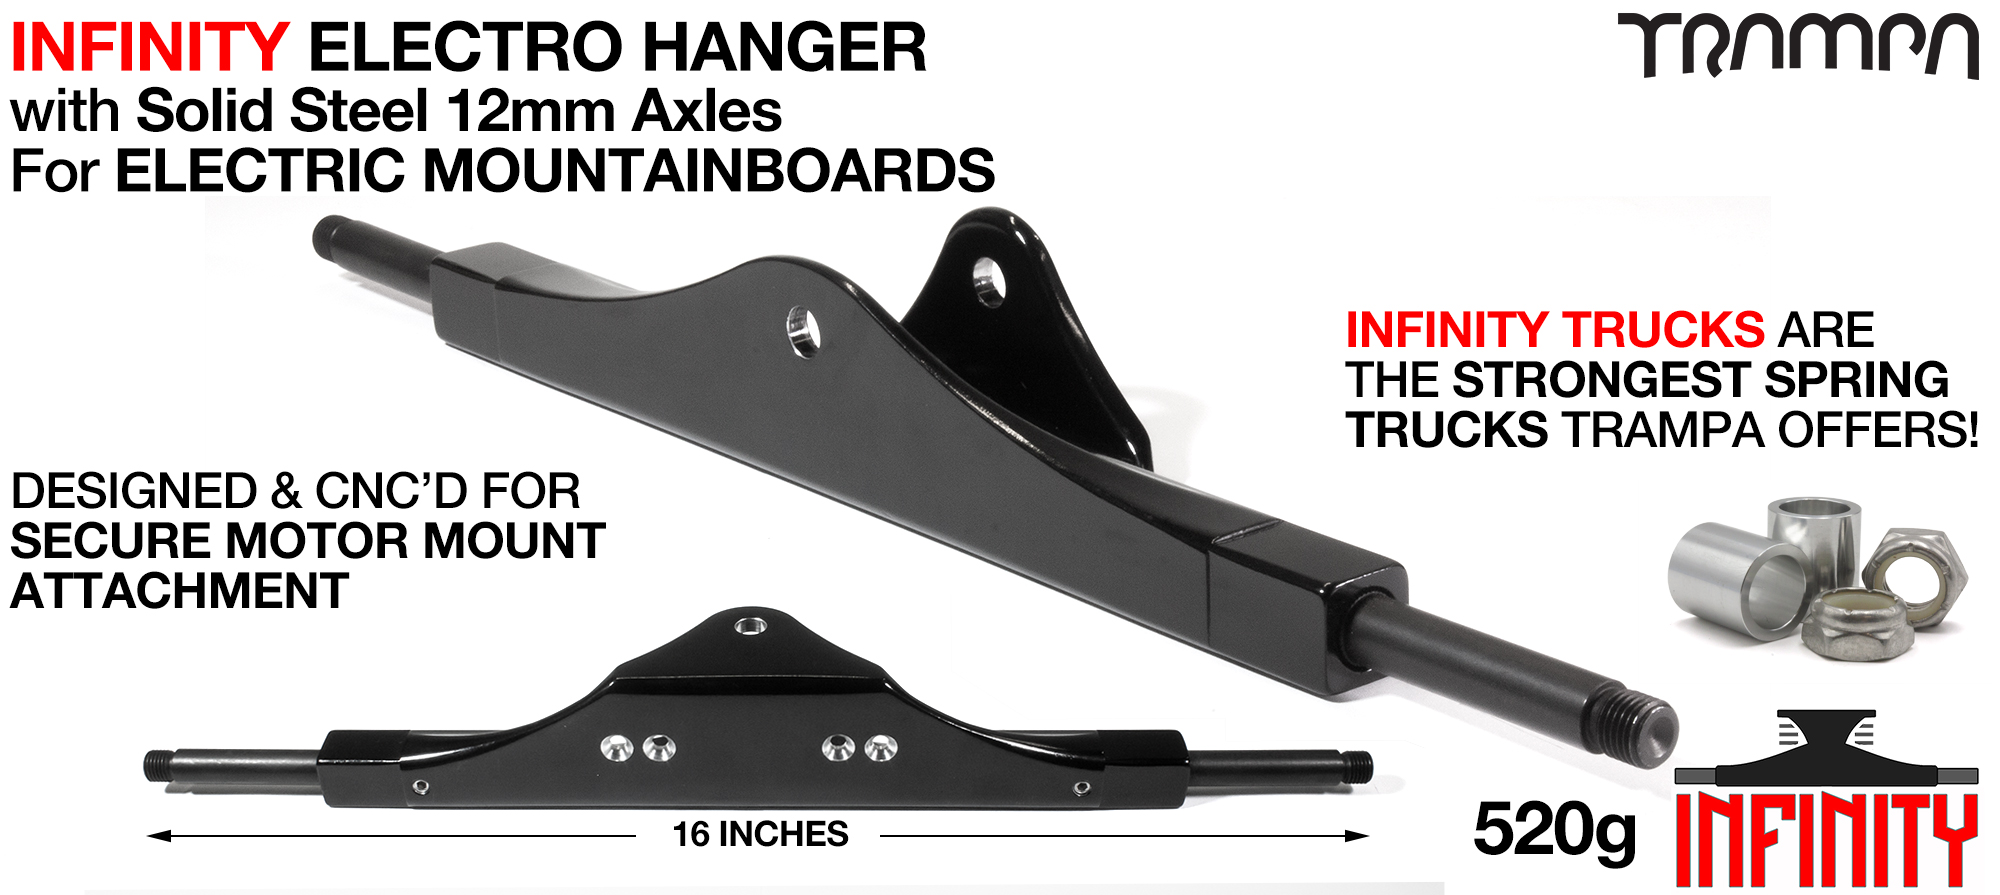 CNC Precision INFINITY E-MTB Hanger - Used in conjunction with all PRO Series Mountainboard Motor Mounts - 16 inch wide 